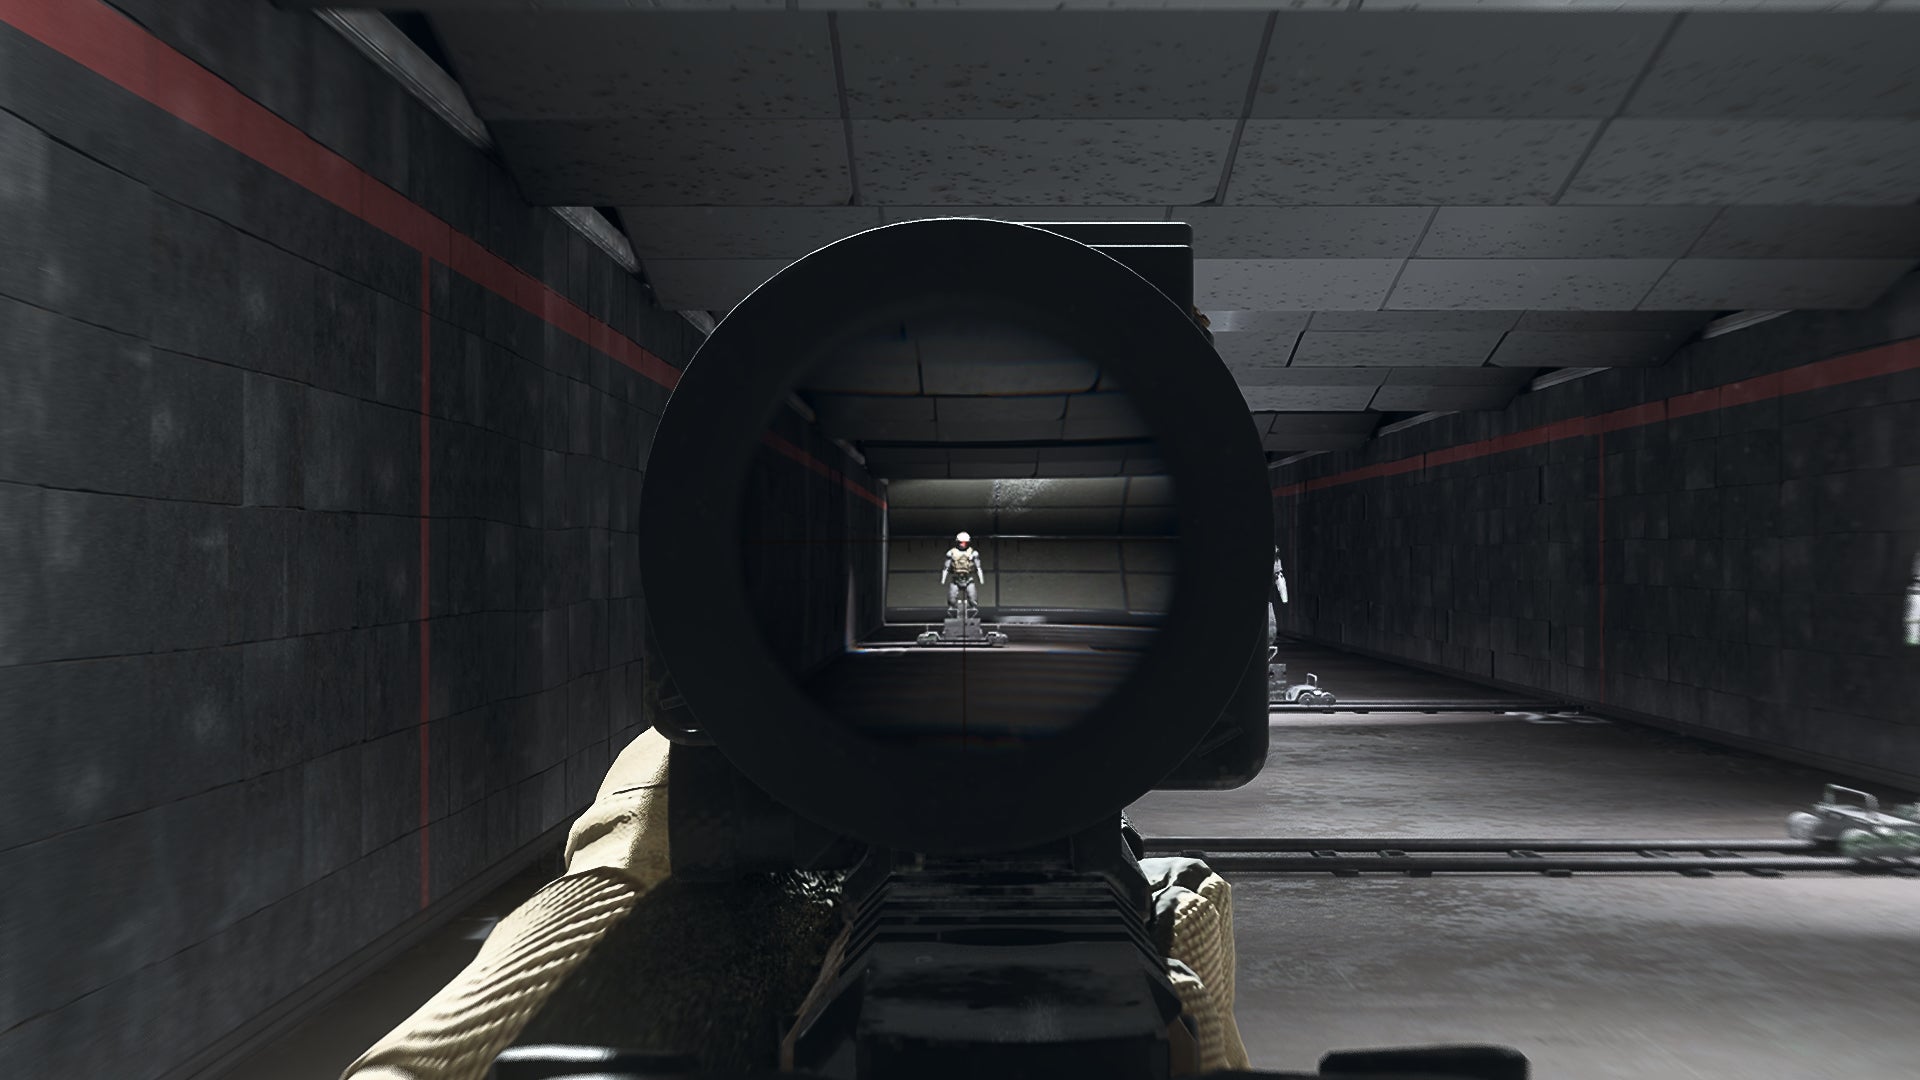 The player in Warzone 2.0 aims at a training dummy using the VLK 4.0 Optic optic attachment.